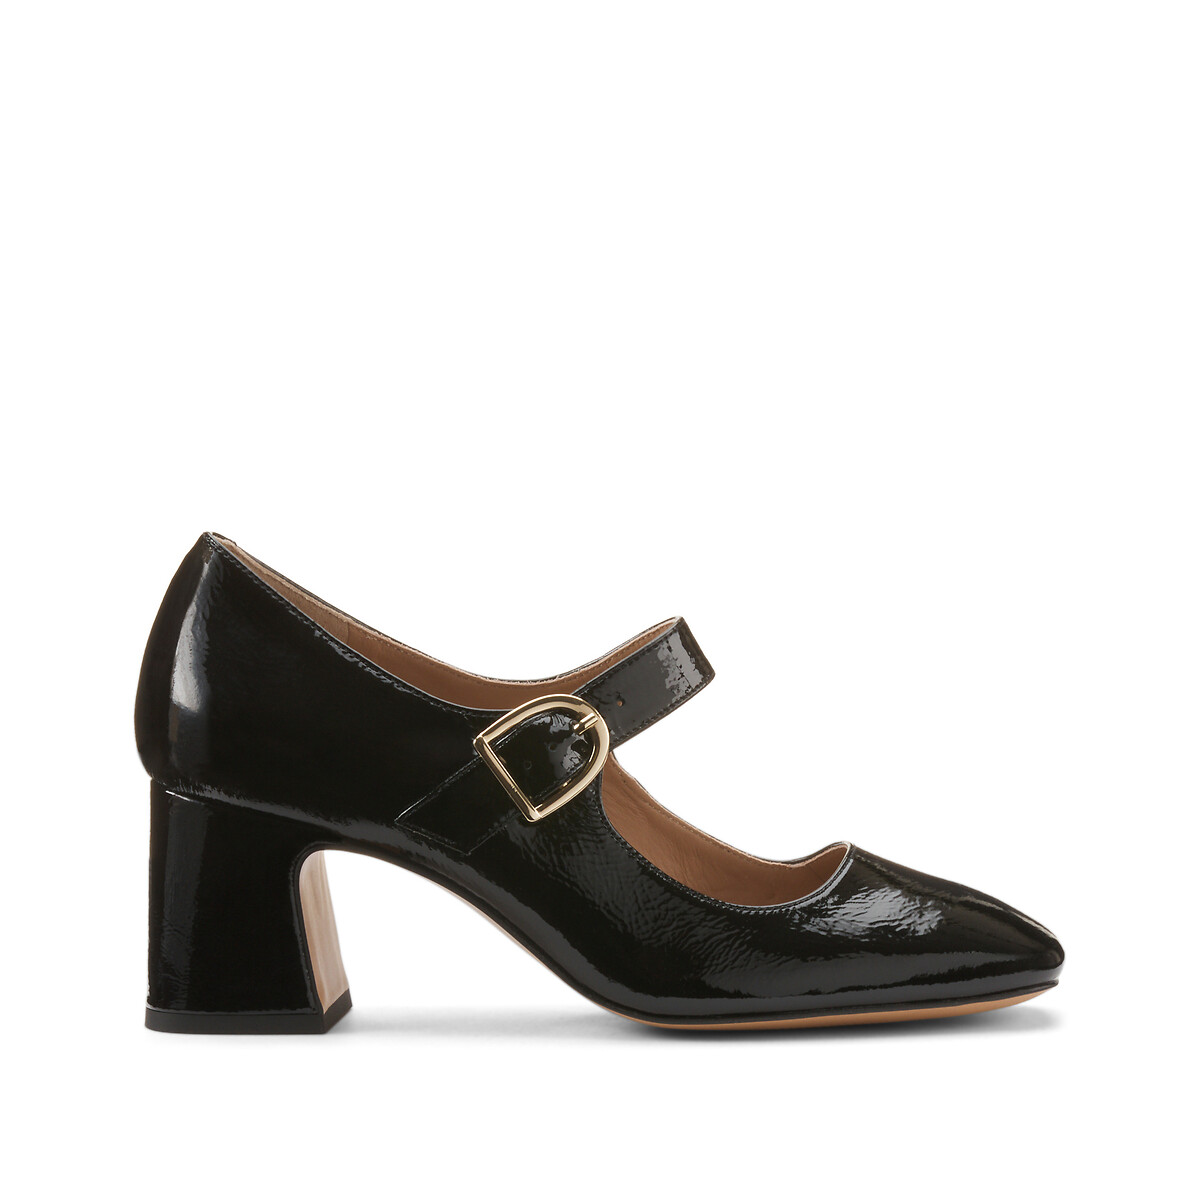 Tamaria Mary Janes in Patent Leather